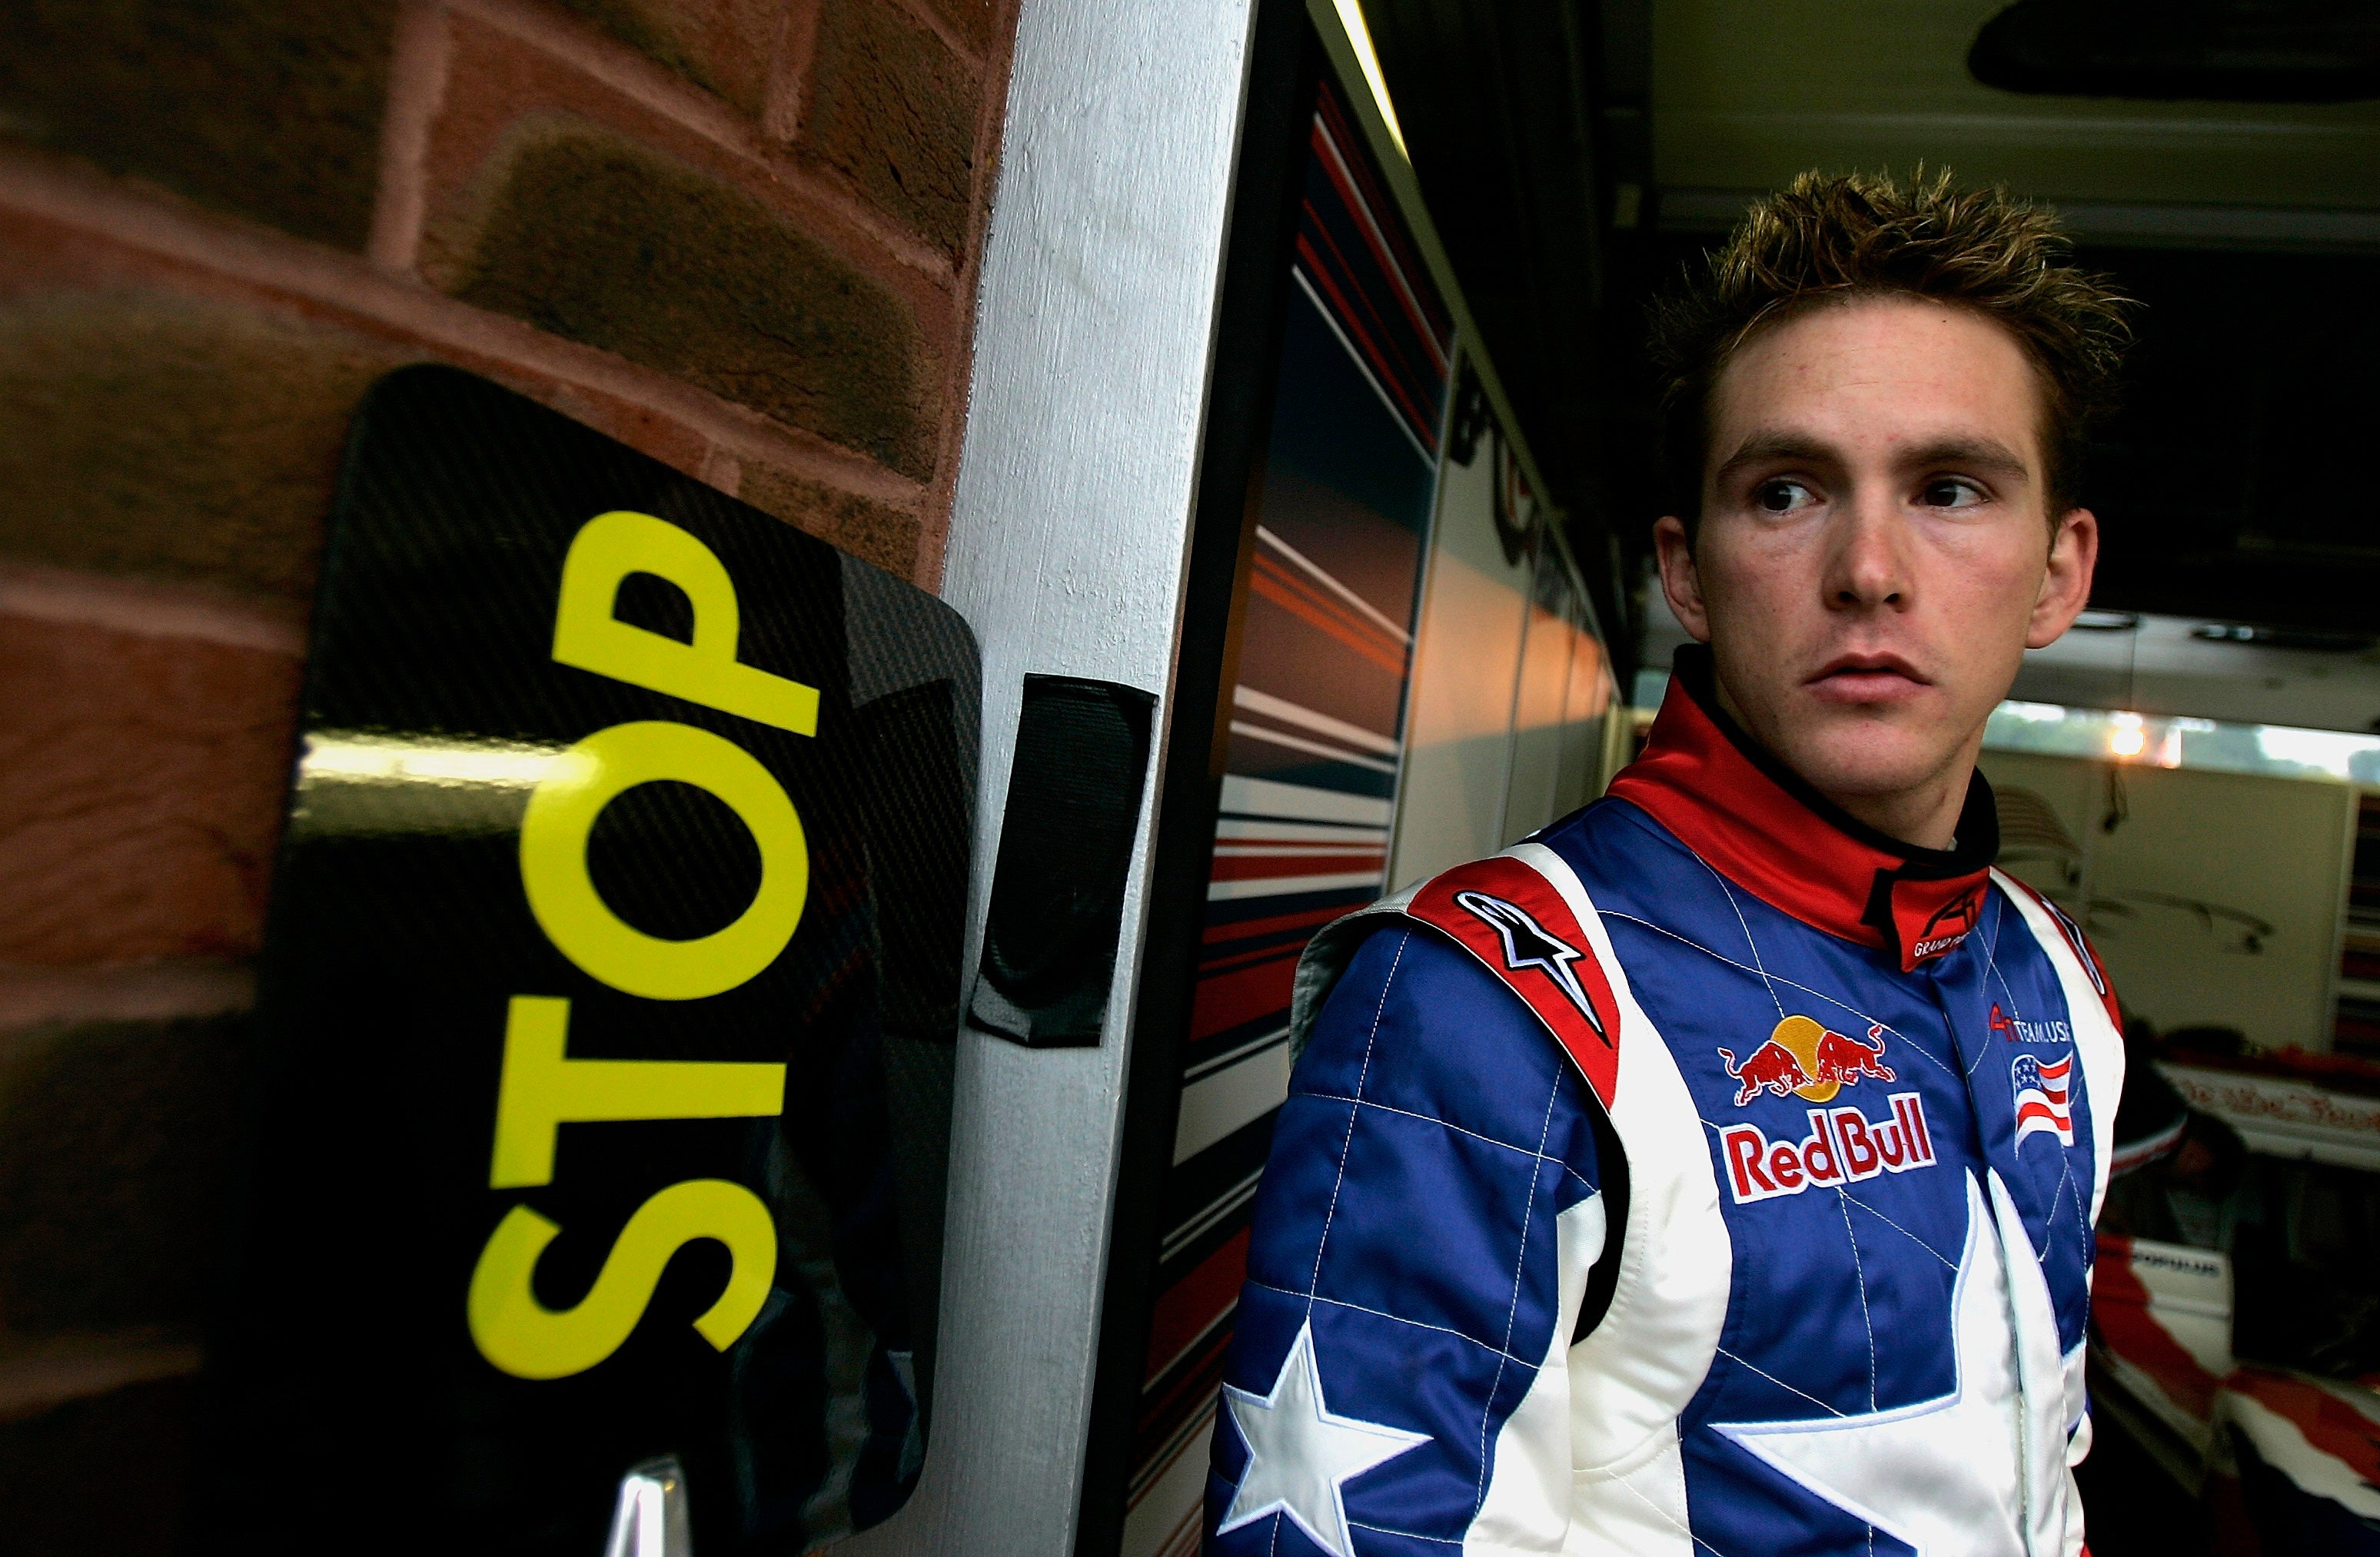 Scott Speed raced in Formula 1 for two years in the 2000s